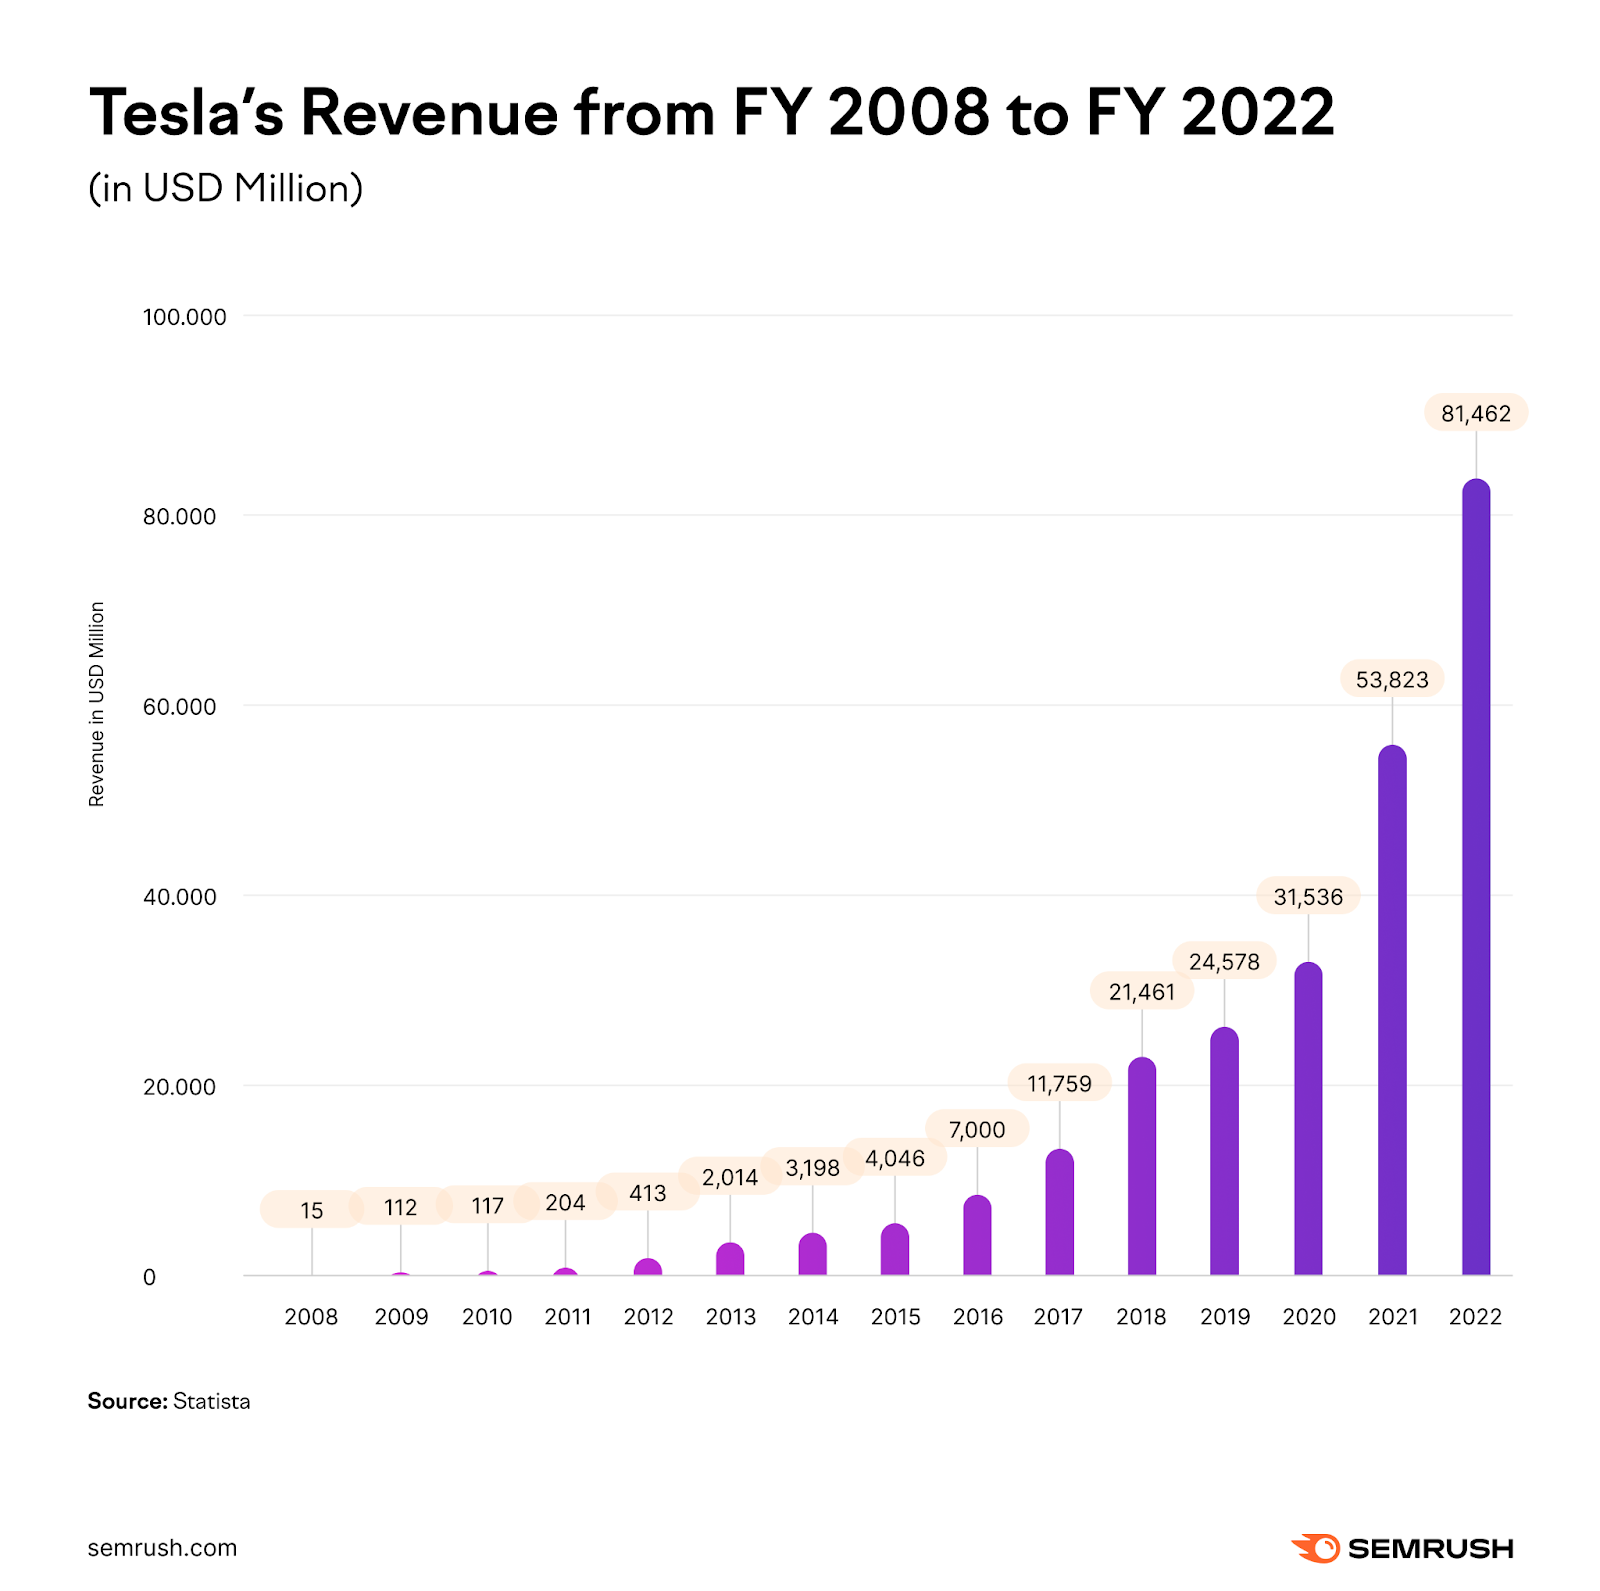 Tesla's revenue graph from FY 2008 to 2022